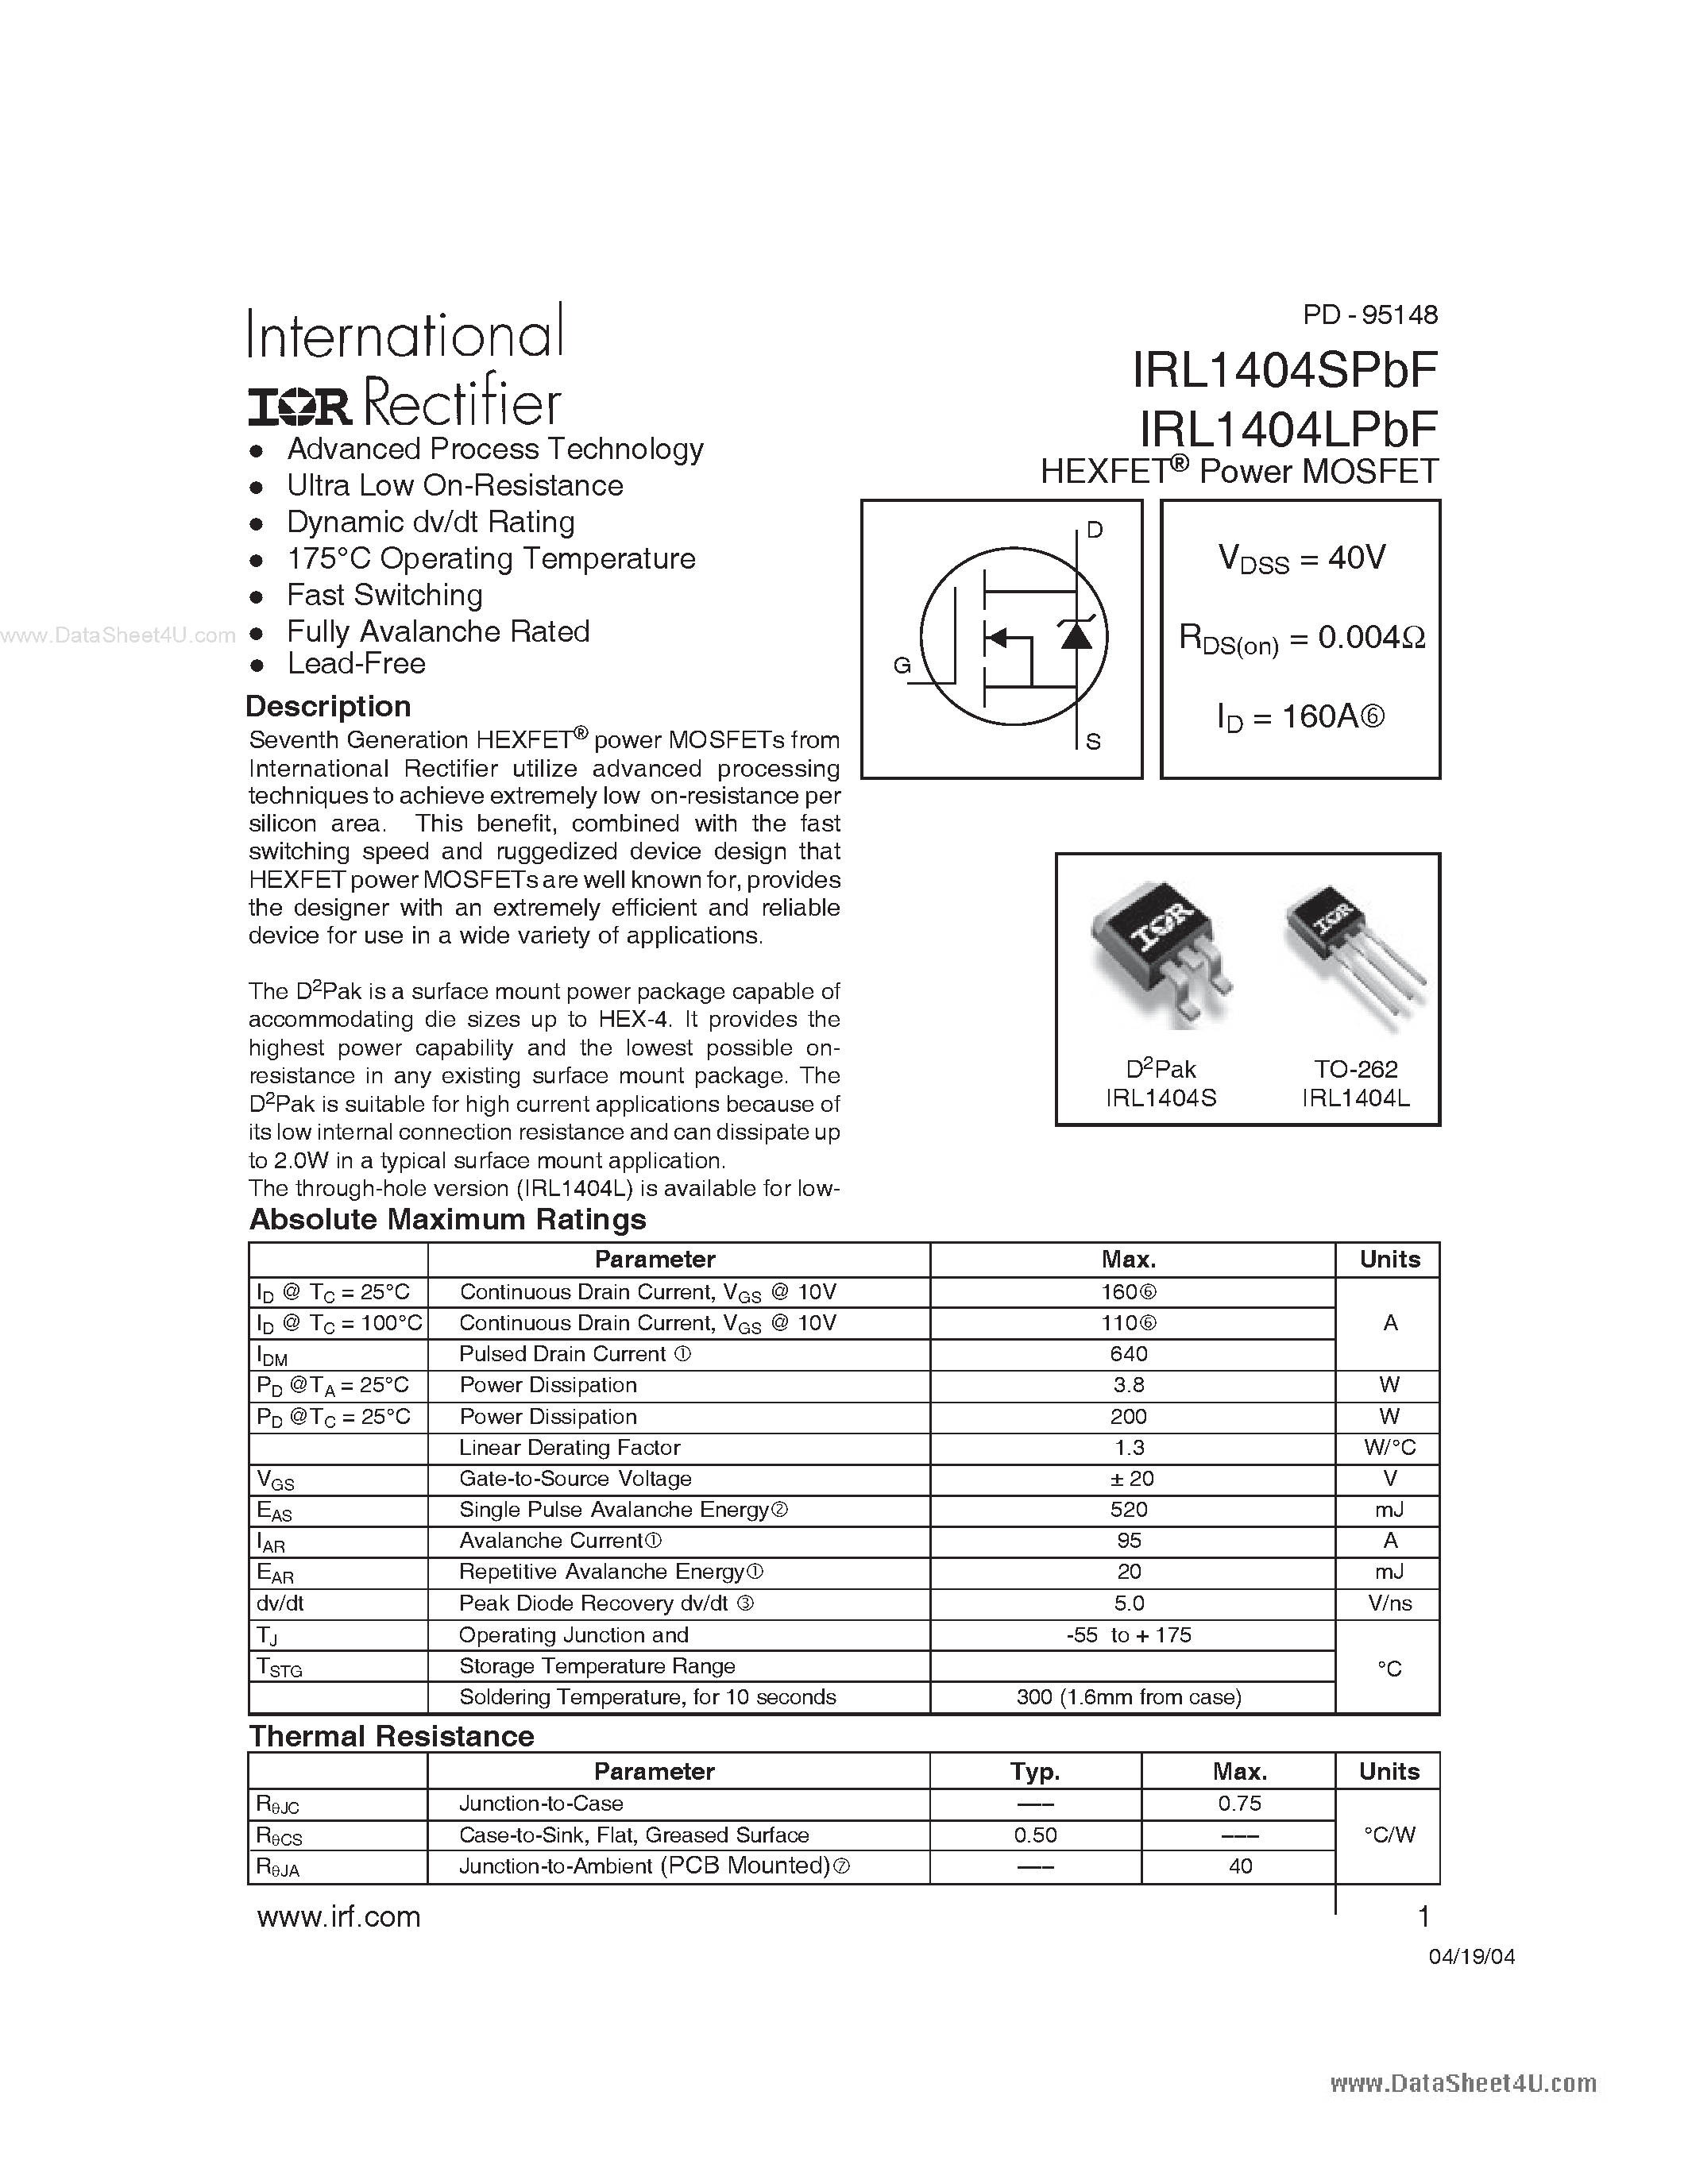 Datasheet IRL1404LPBF - Power MOSFET page 1